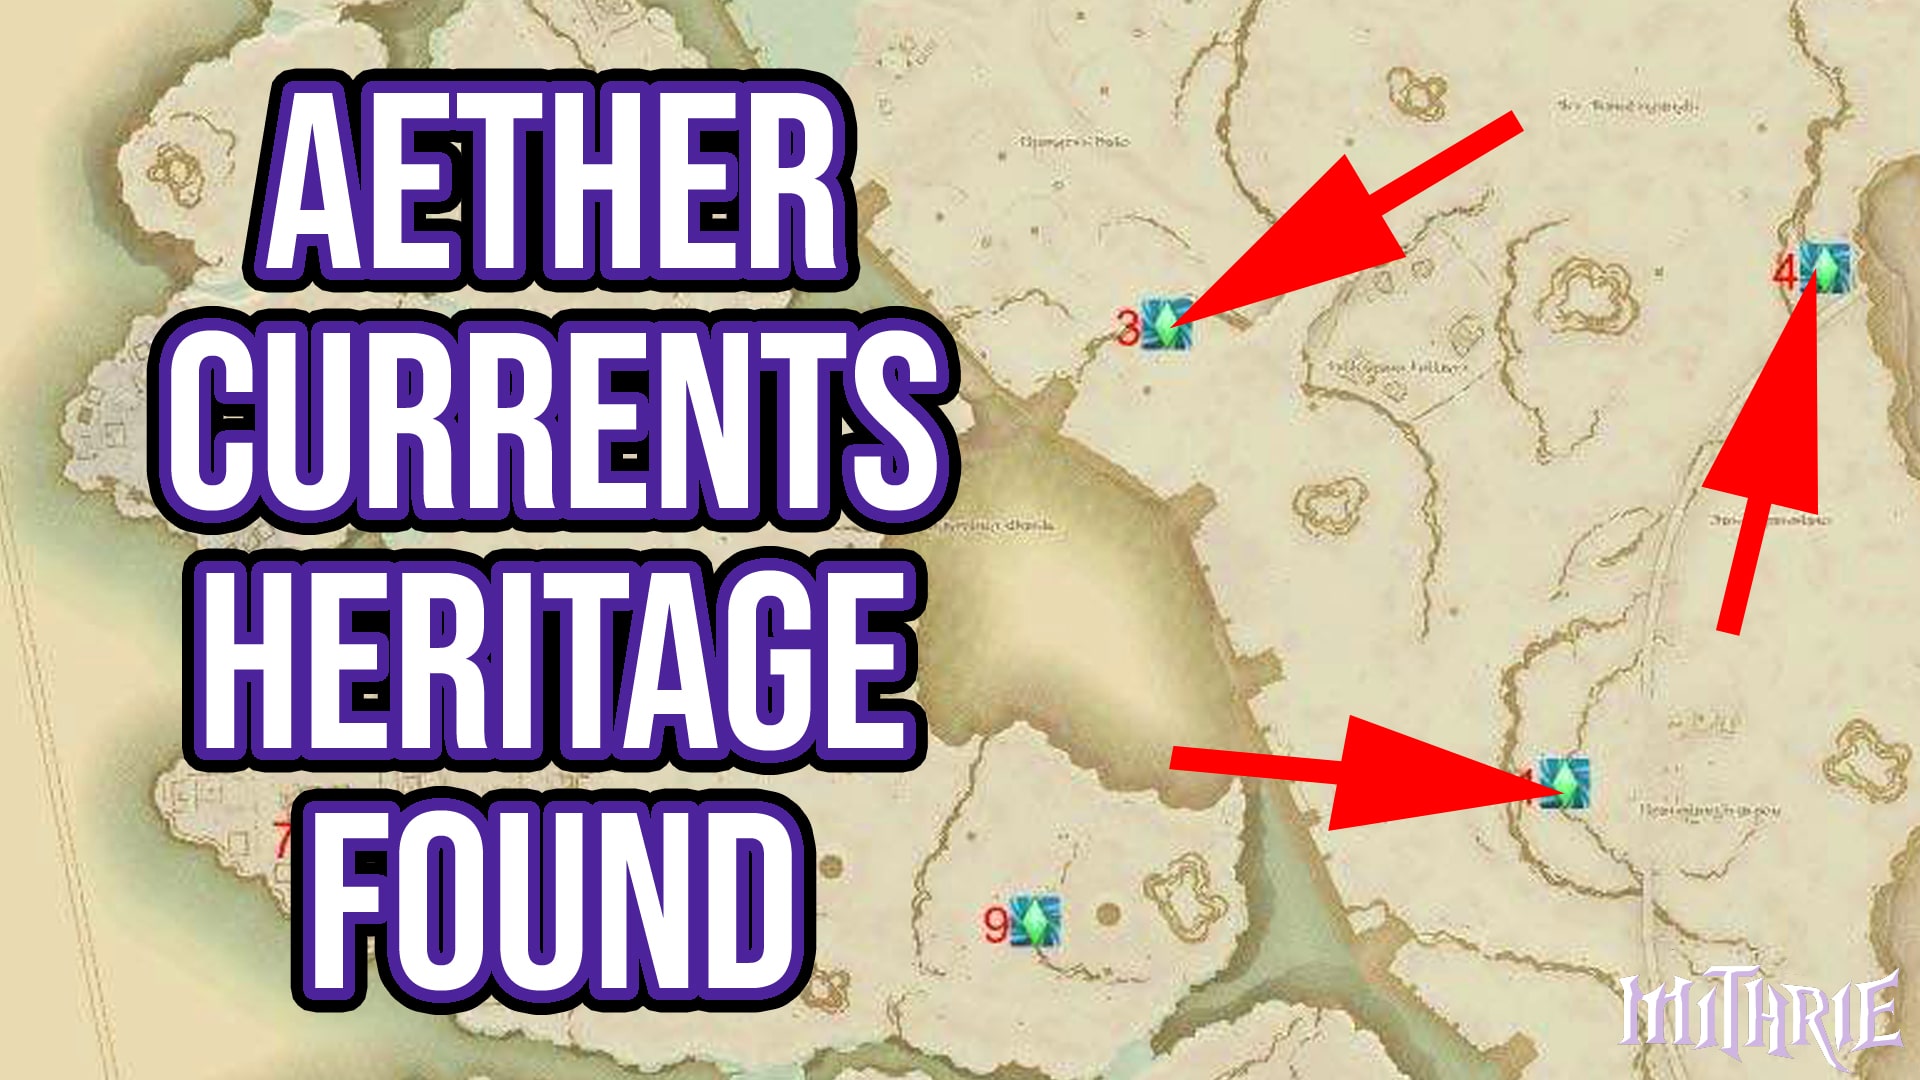 Aether Currents: Heritage Found